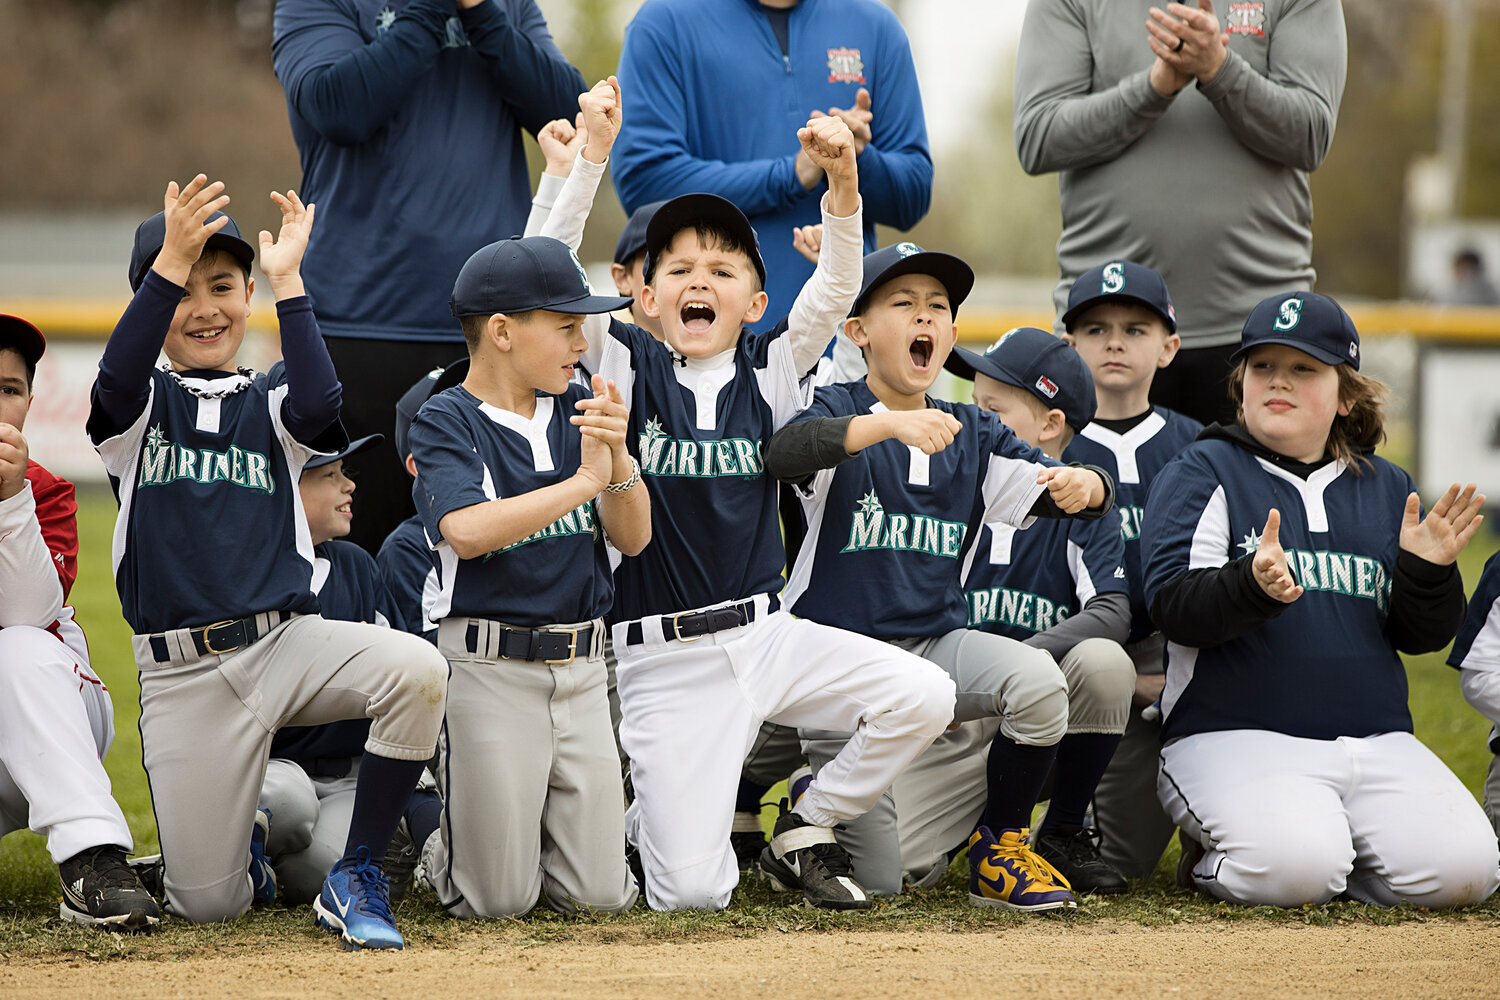 Sam Champman (center) cheers with the Mariners as their team is announced during Opening Day.